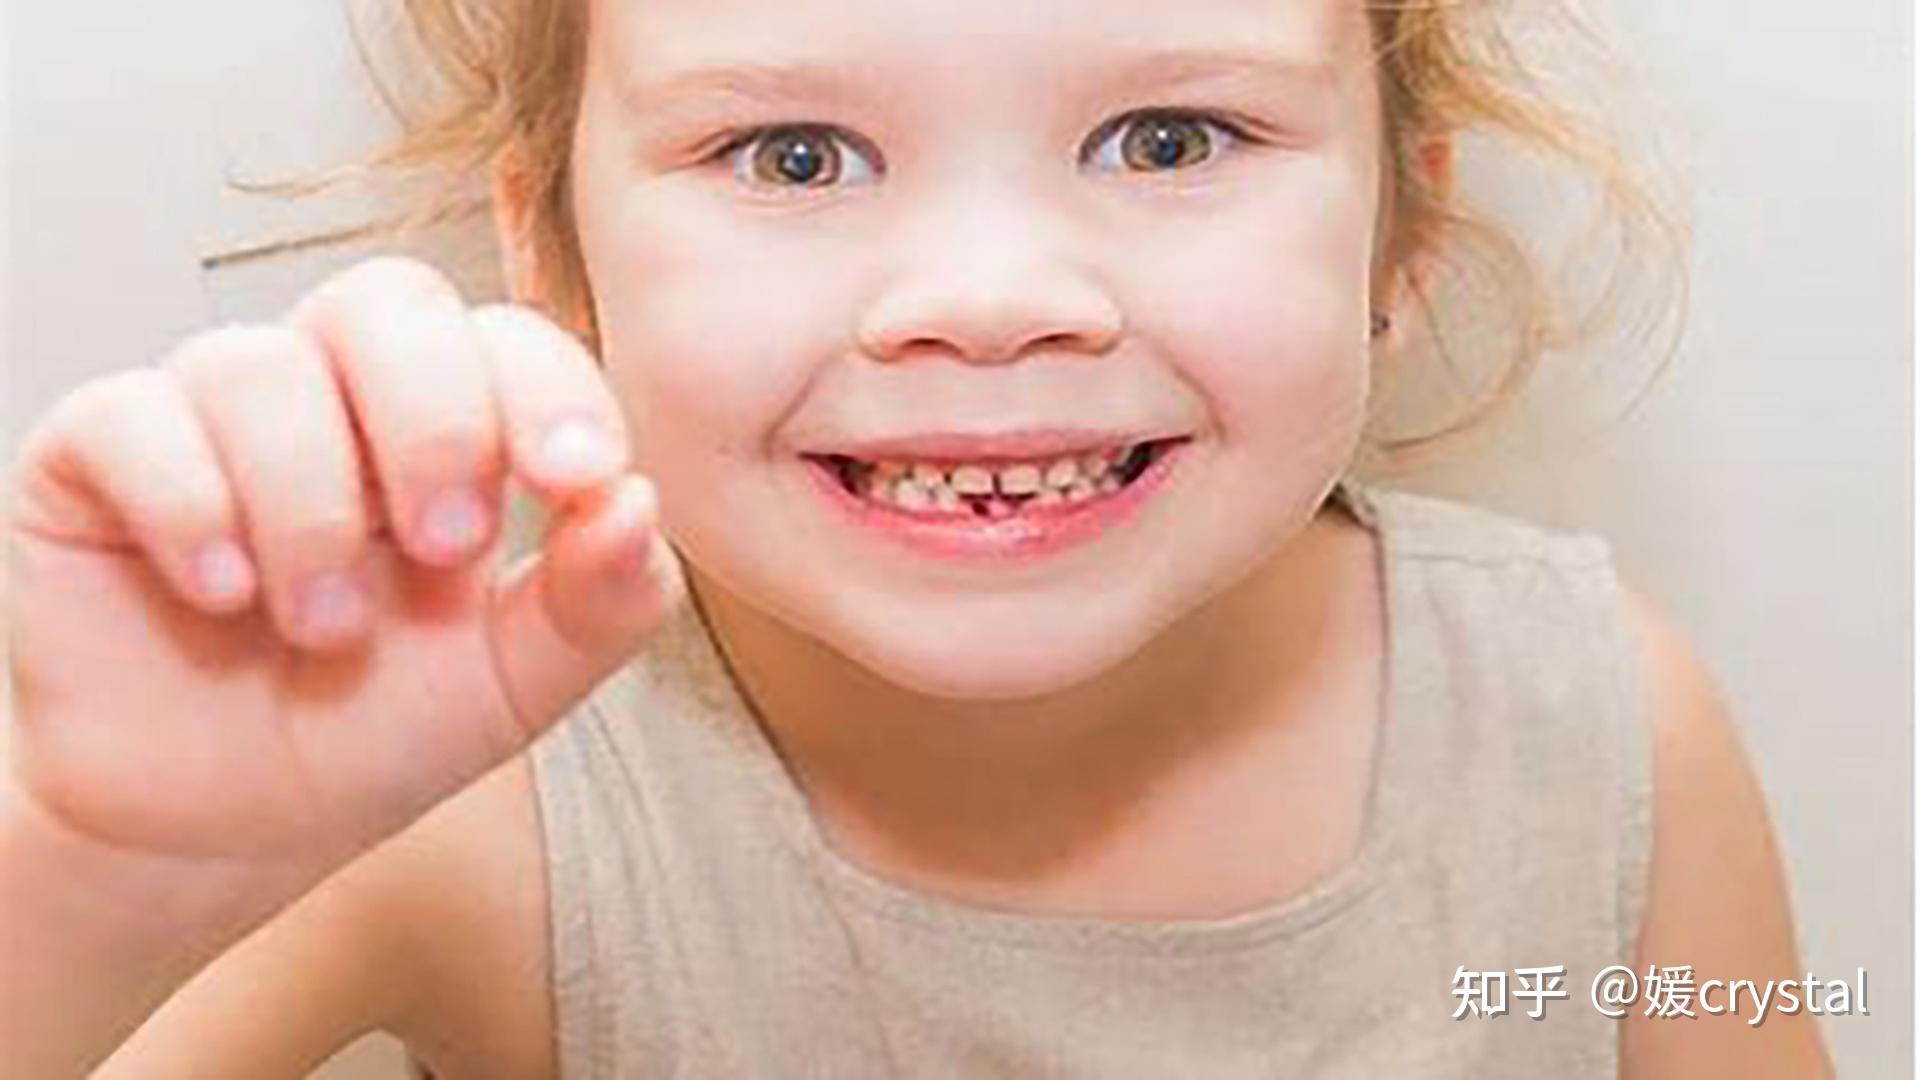 Why do more and more children have "double rows of teeth"?There are ...